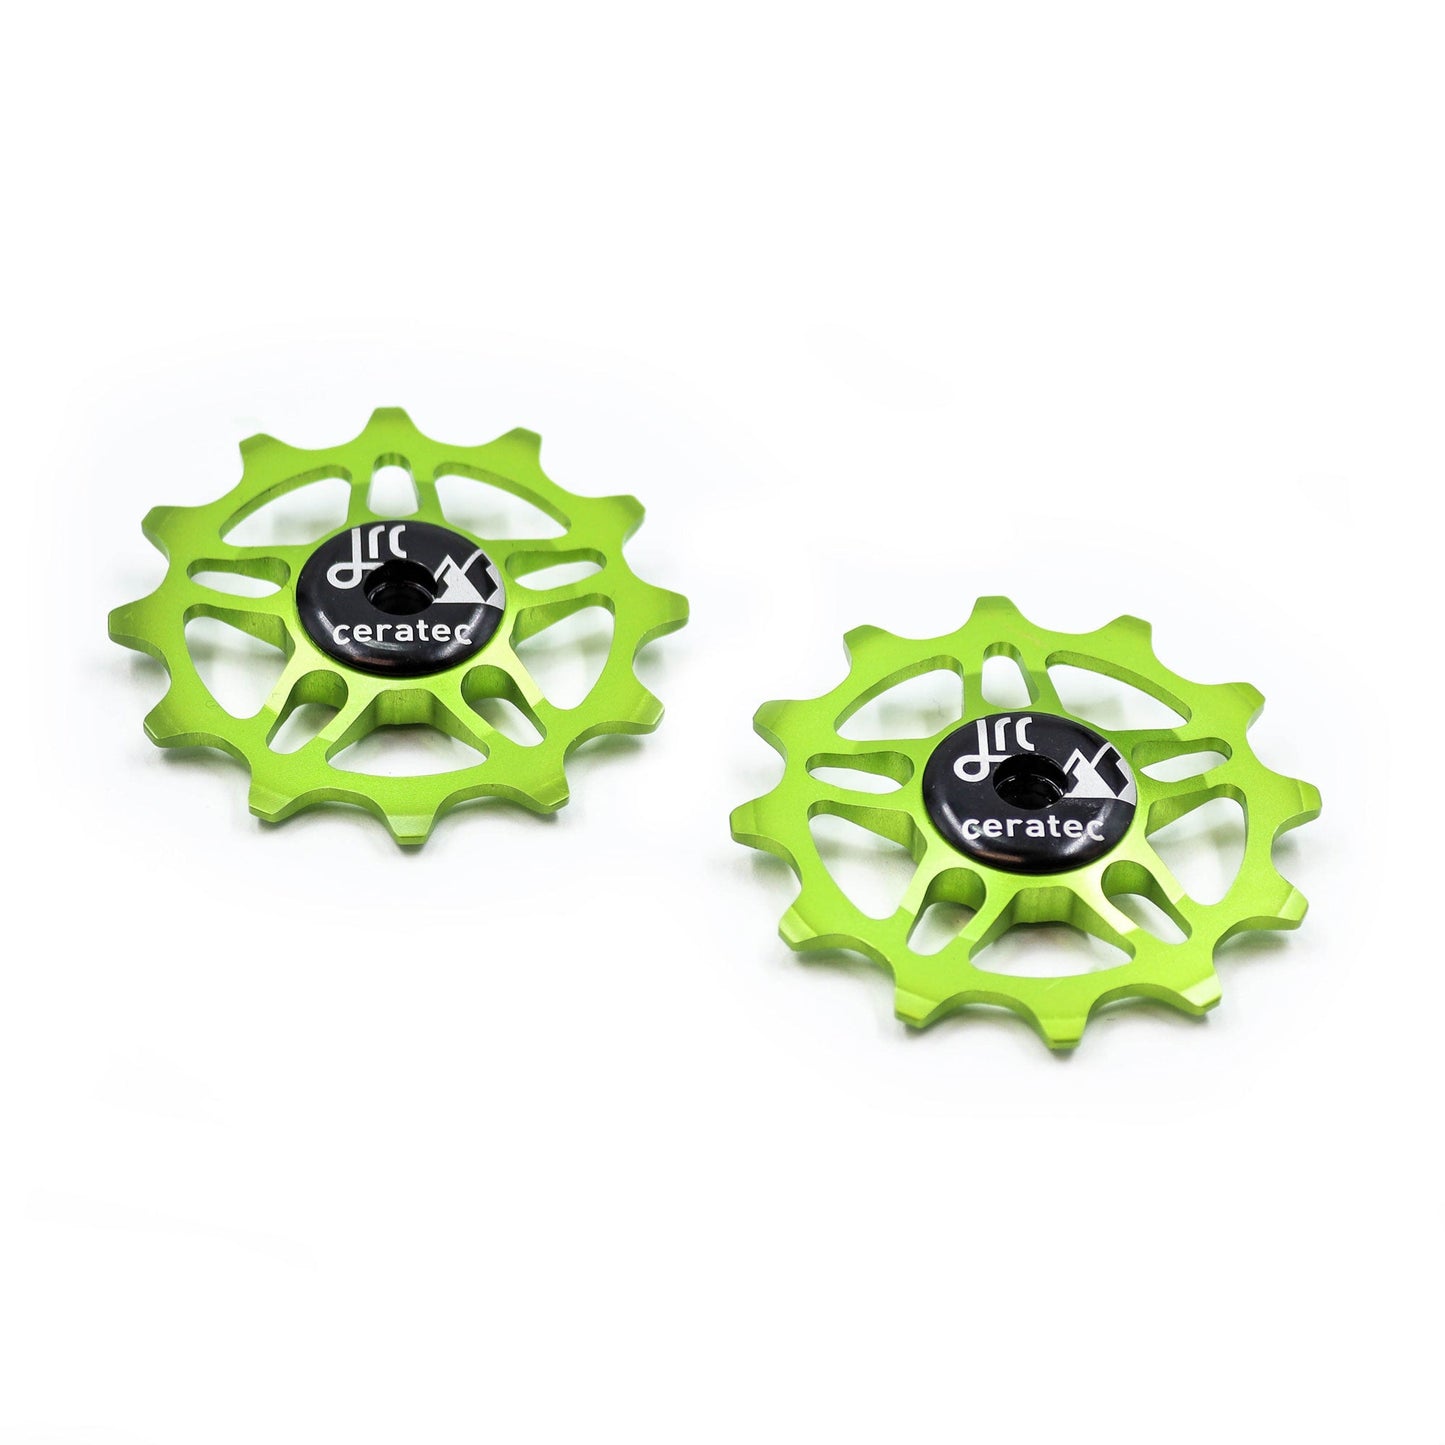 Acid green, lightweight aluminium pulley wheel set for bicycles, compatible with 12 tooth SRAM Rival/ Force/ Red/ AXS